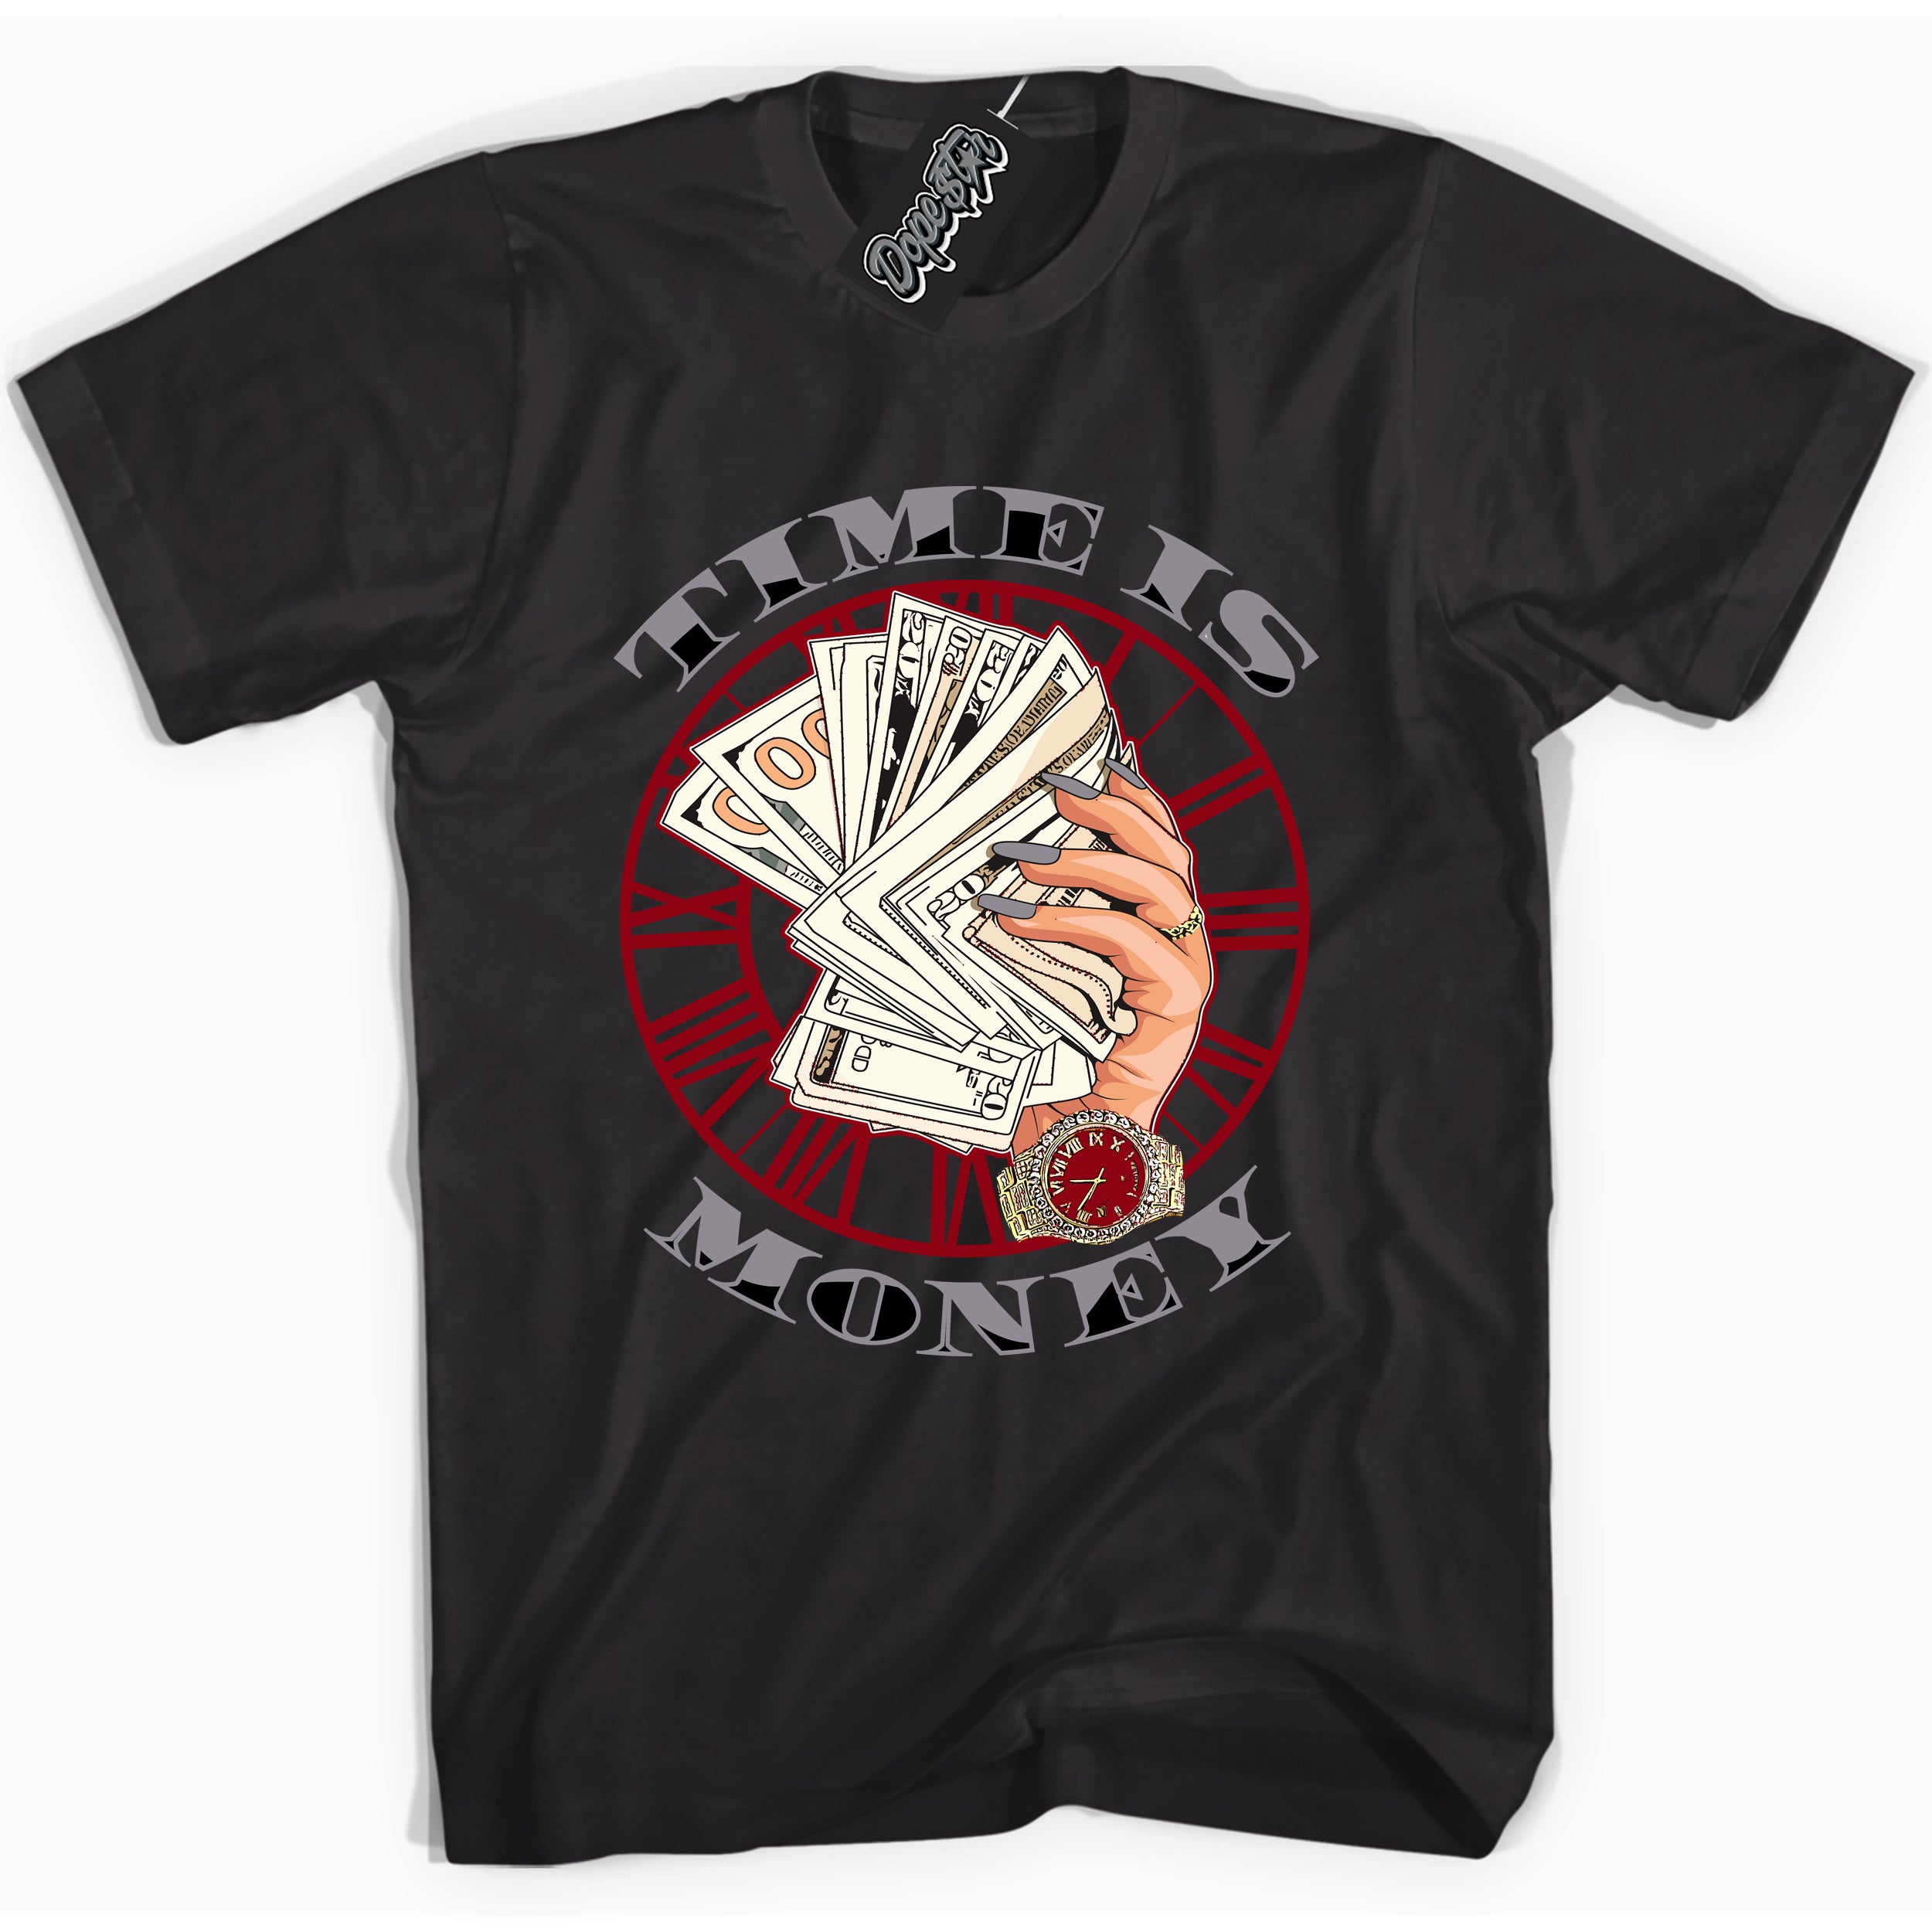 Cool Black Shirt with “ Time Is Money” design that perfectly matches Bred Reimagined 4s Jordans.